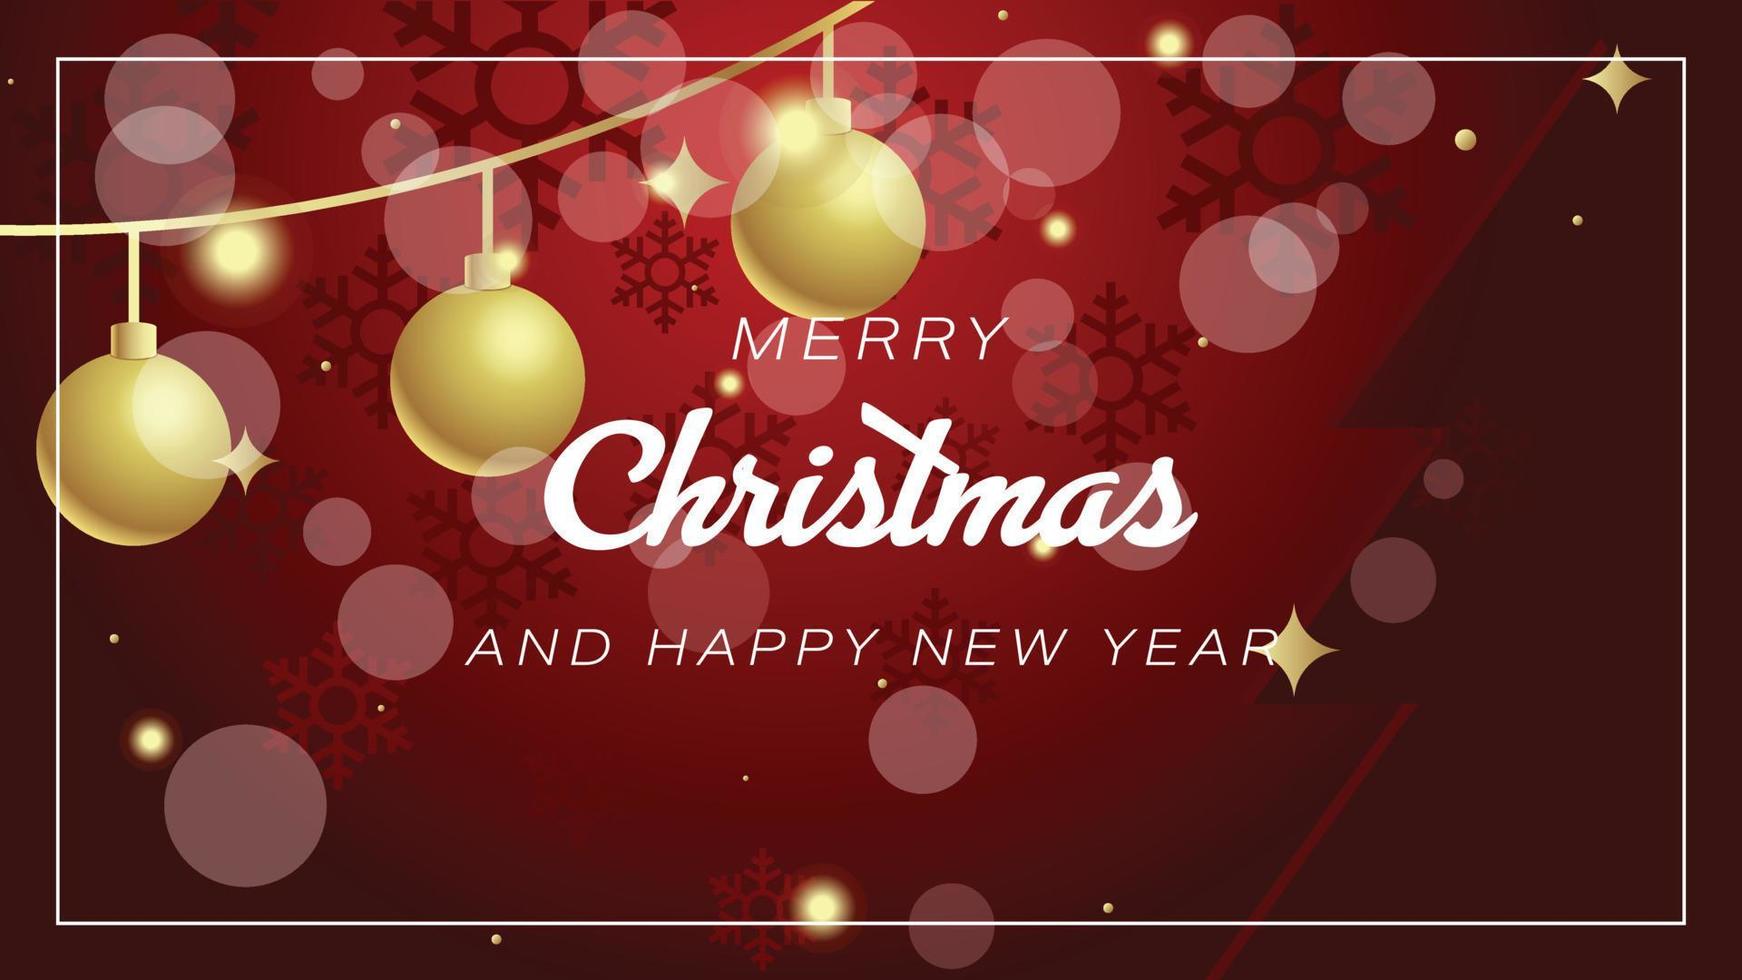 Merry Christmas Red Luminous Web Landing Page vector